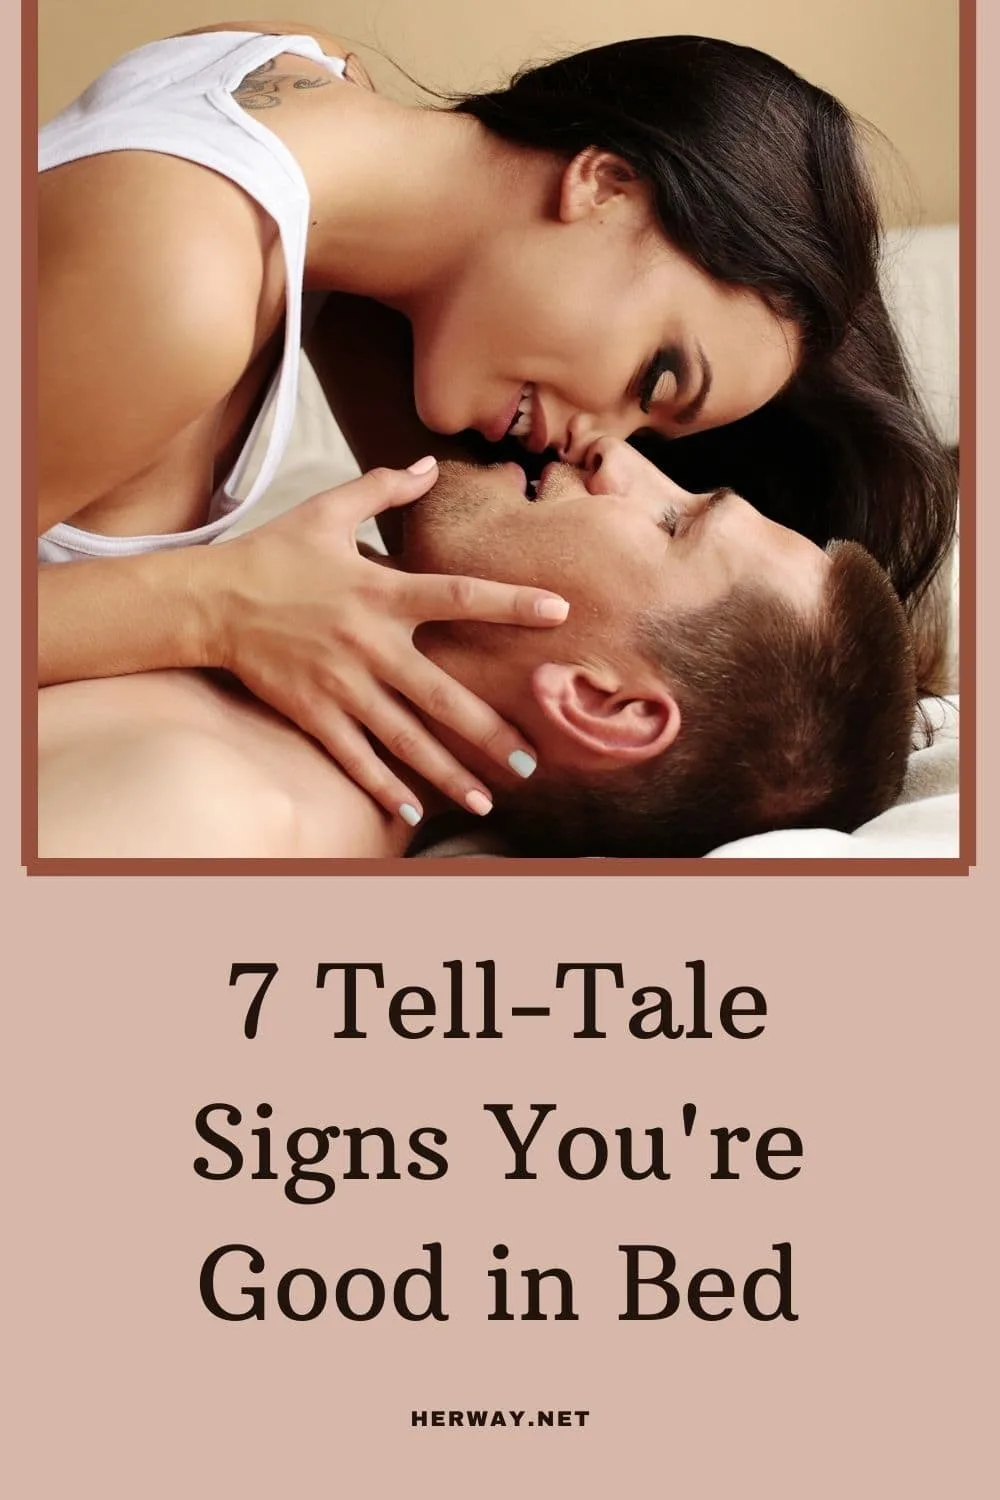 7 Tell-Tale Signs You're Good in Bed